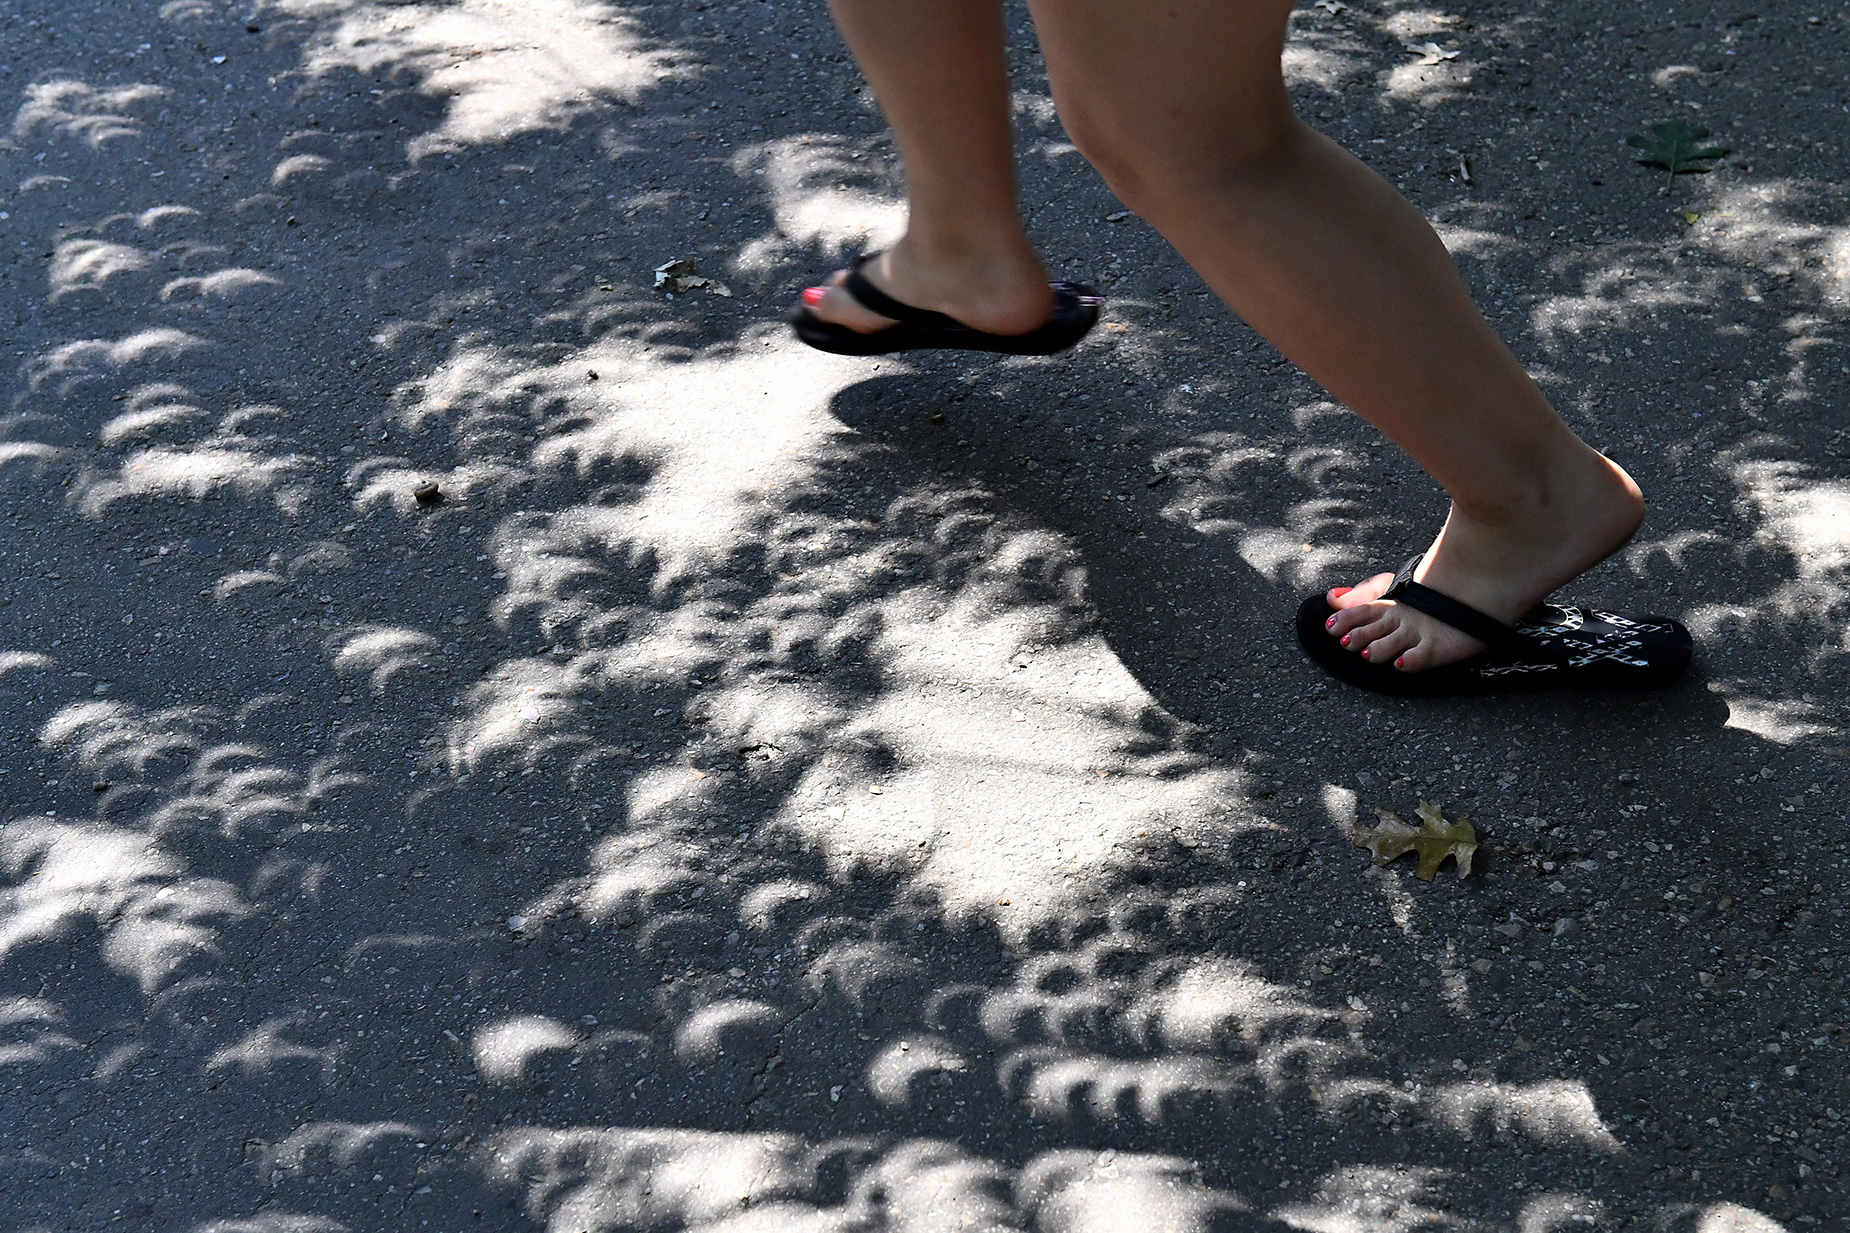 A spectator runs through crescent shaped shadows created by the solar eclipse in Washington, DC, on August 21, 2017.